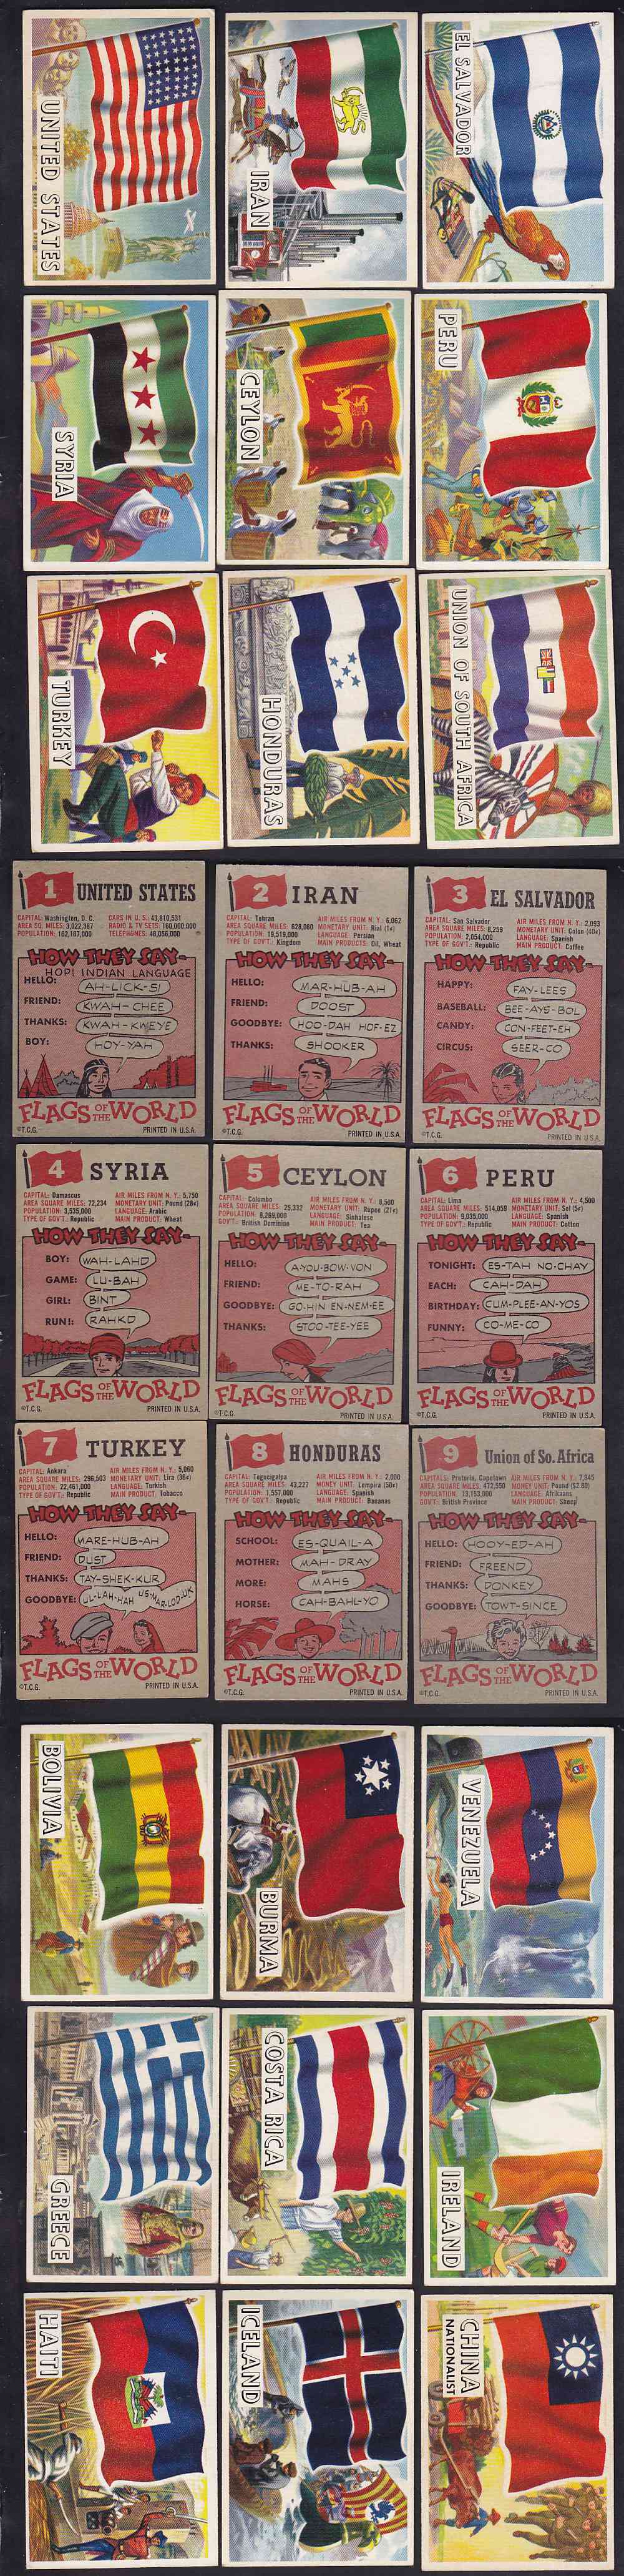 1956 TOPPS FLAGS OF THE WORLD CARD FULL SET 80/80 photo